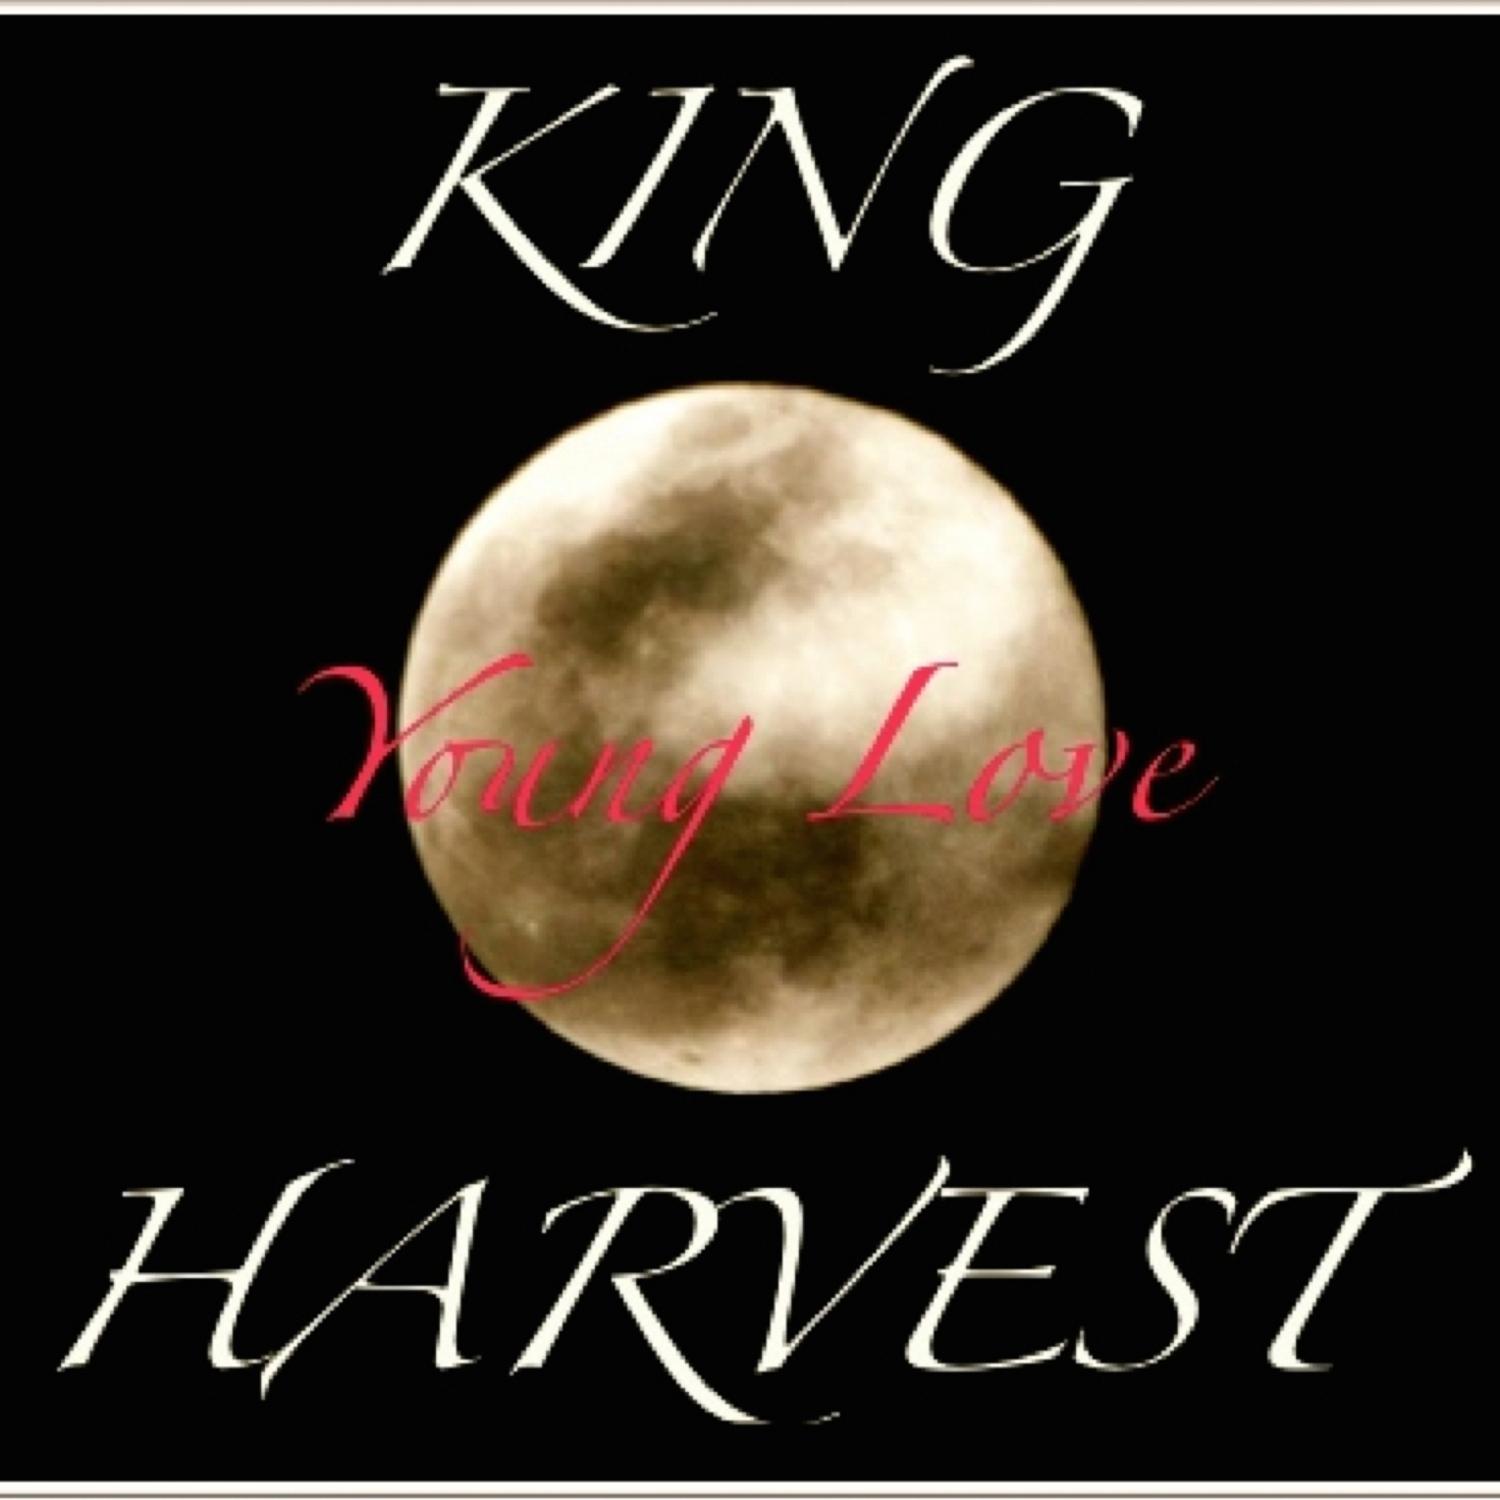 King Harvest - That's the Way Love Is